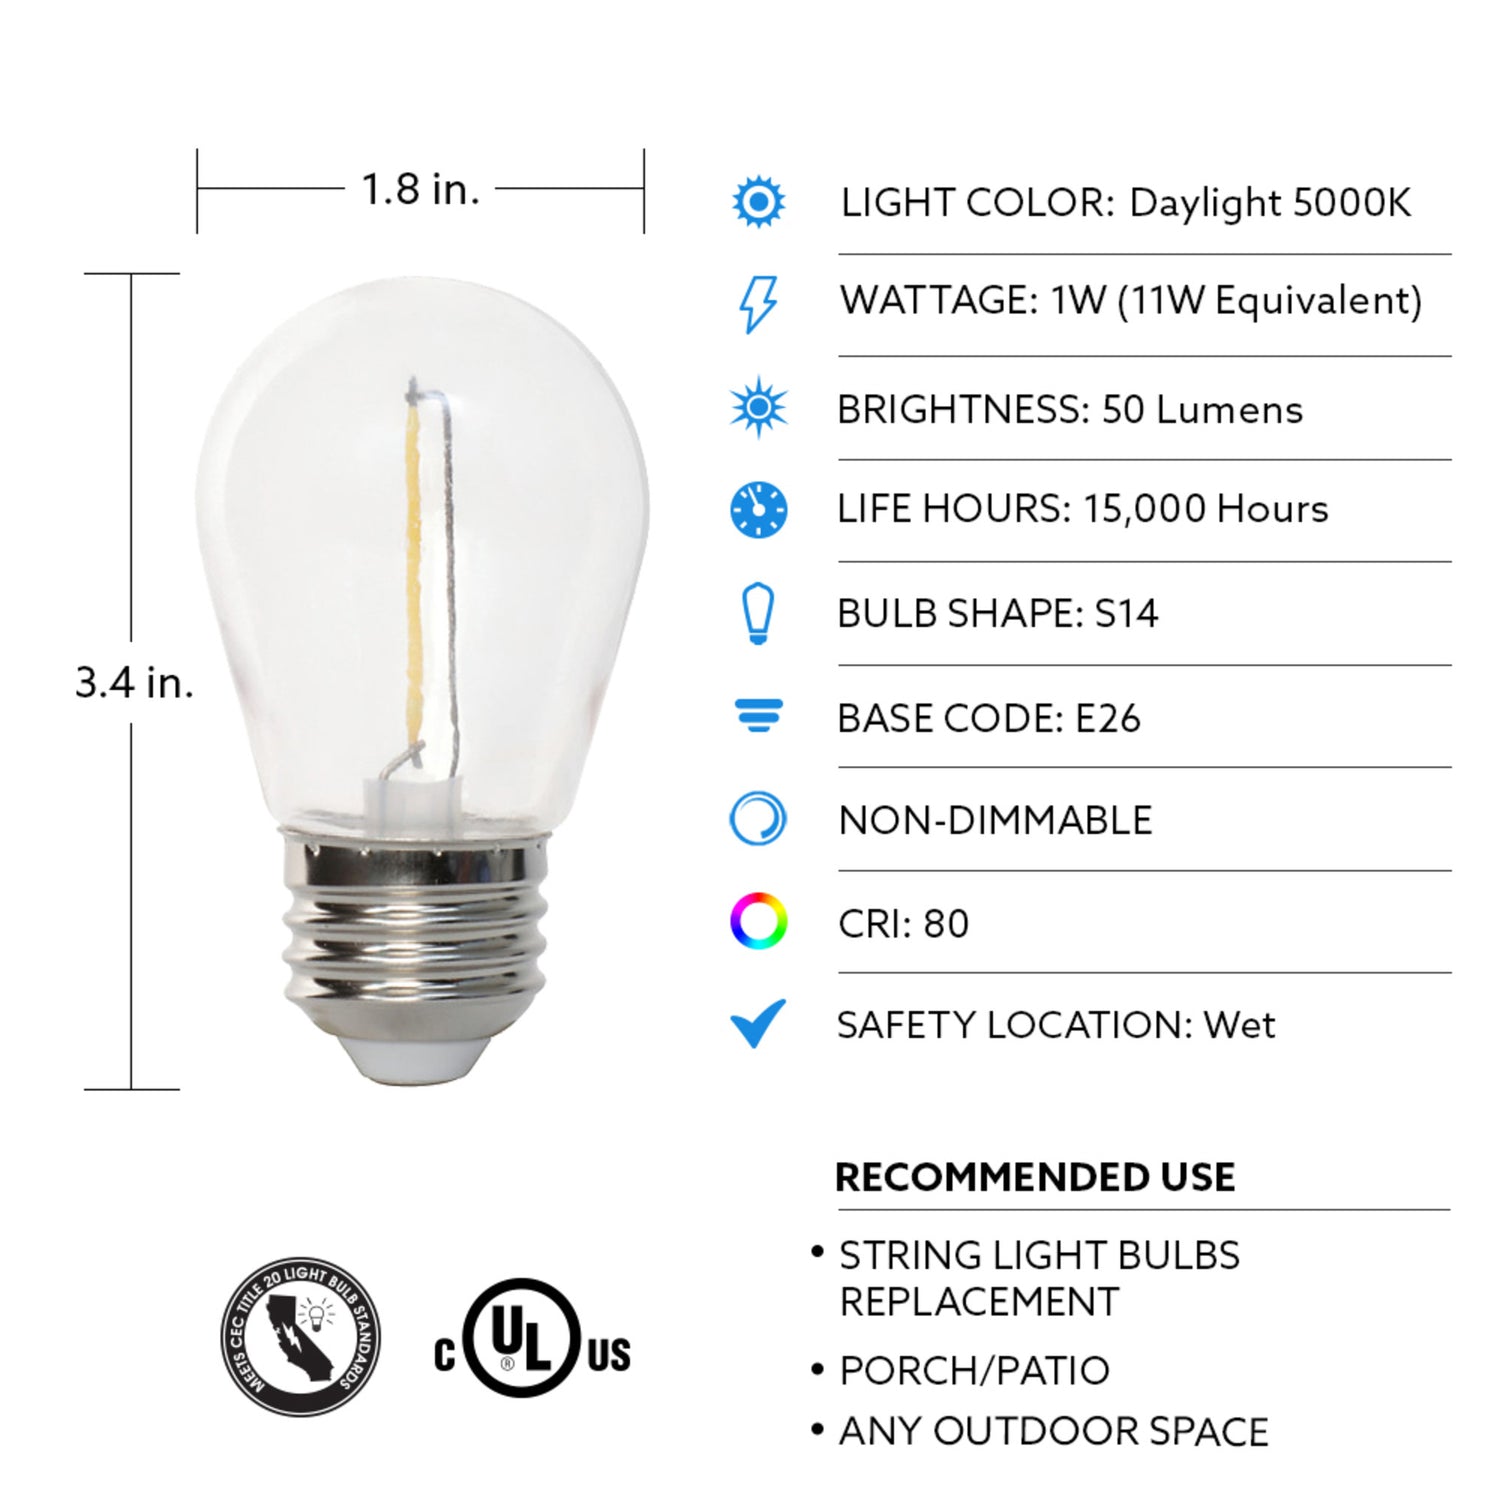 1W (11W Equivalent) Daylight White (5000K) S14 Base (E26 Replacement) LED Exposed Filament Replacement Light Bulb (4-Pack)